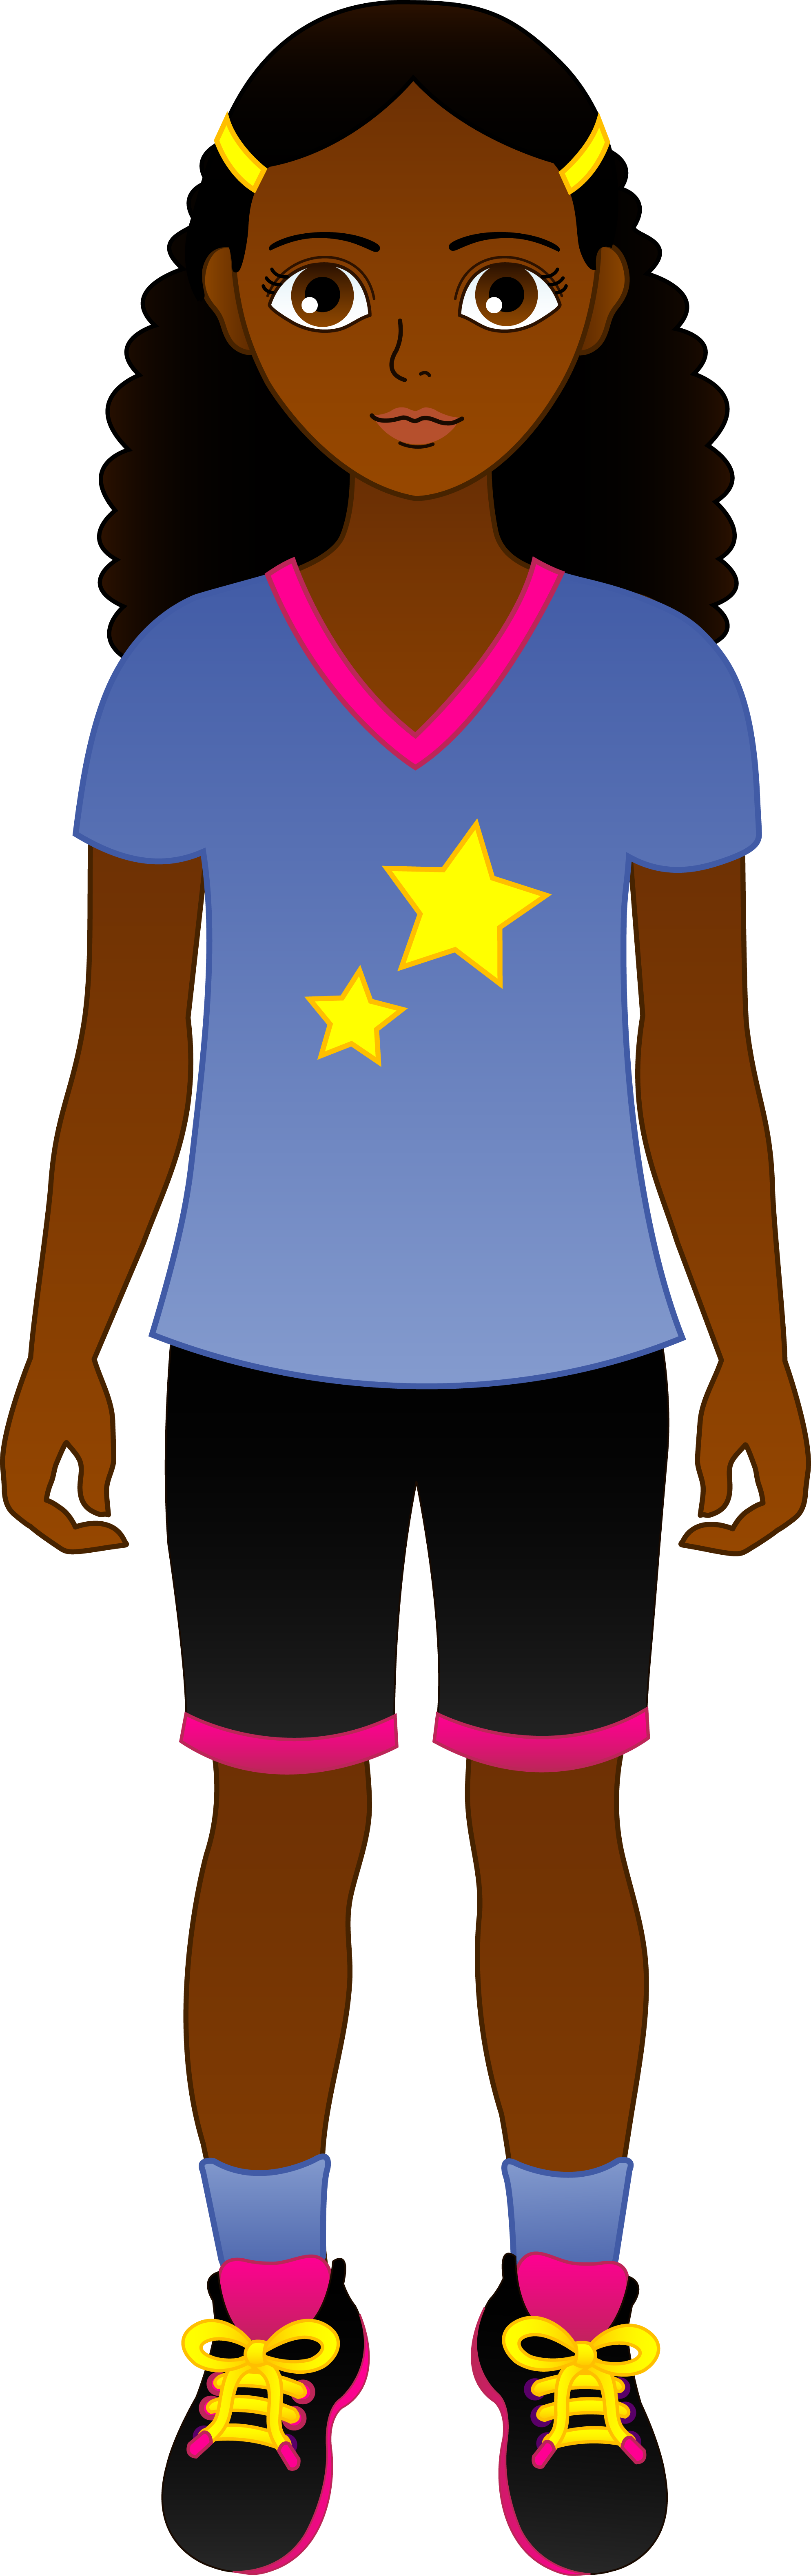 hair clipart african american youth